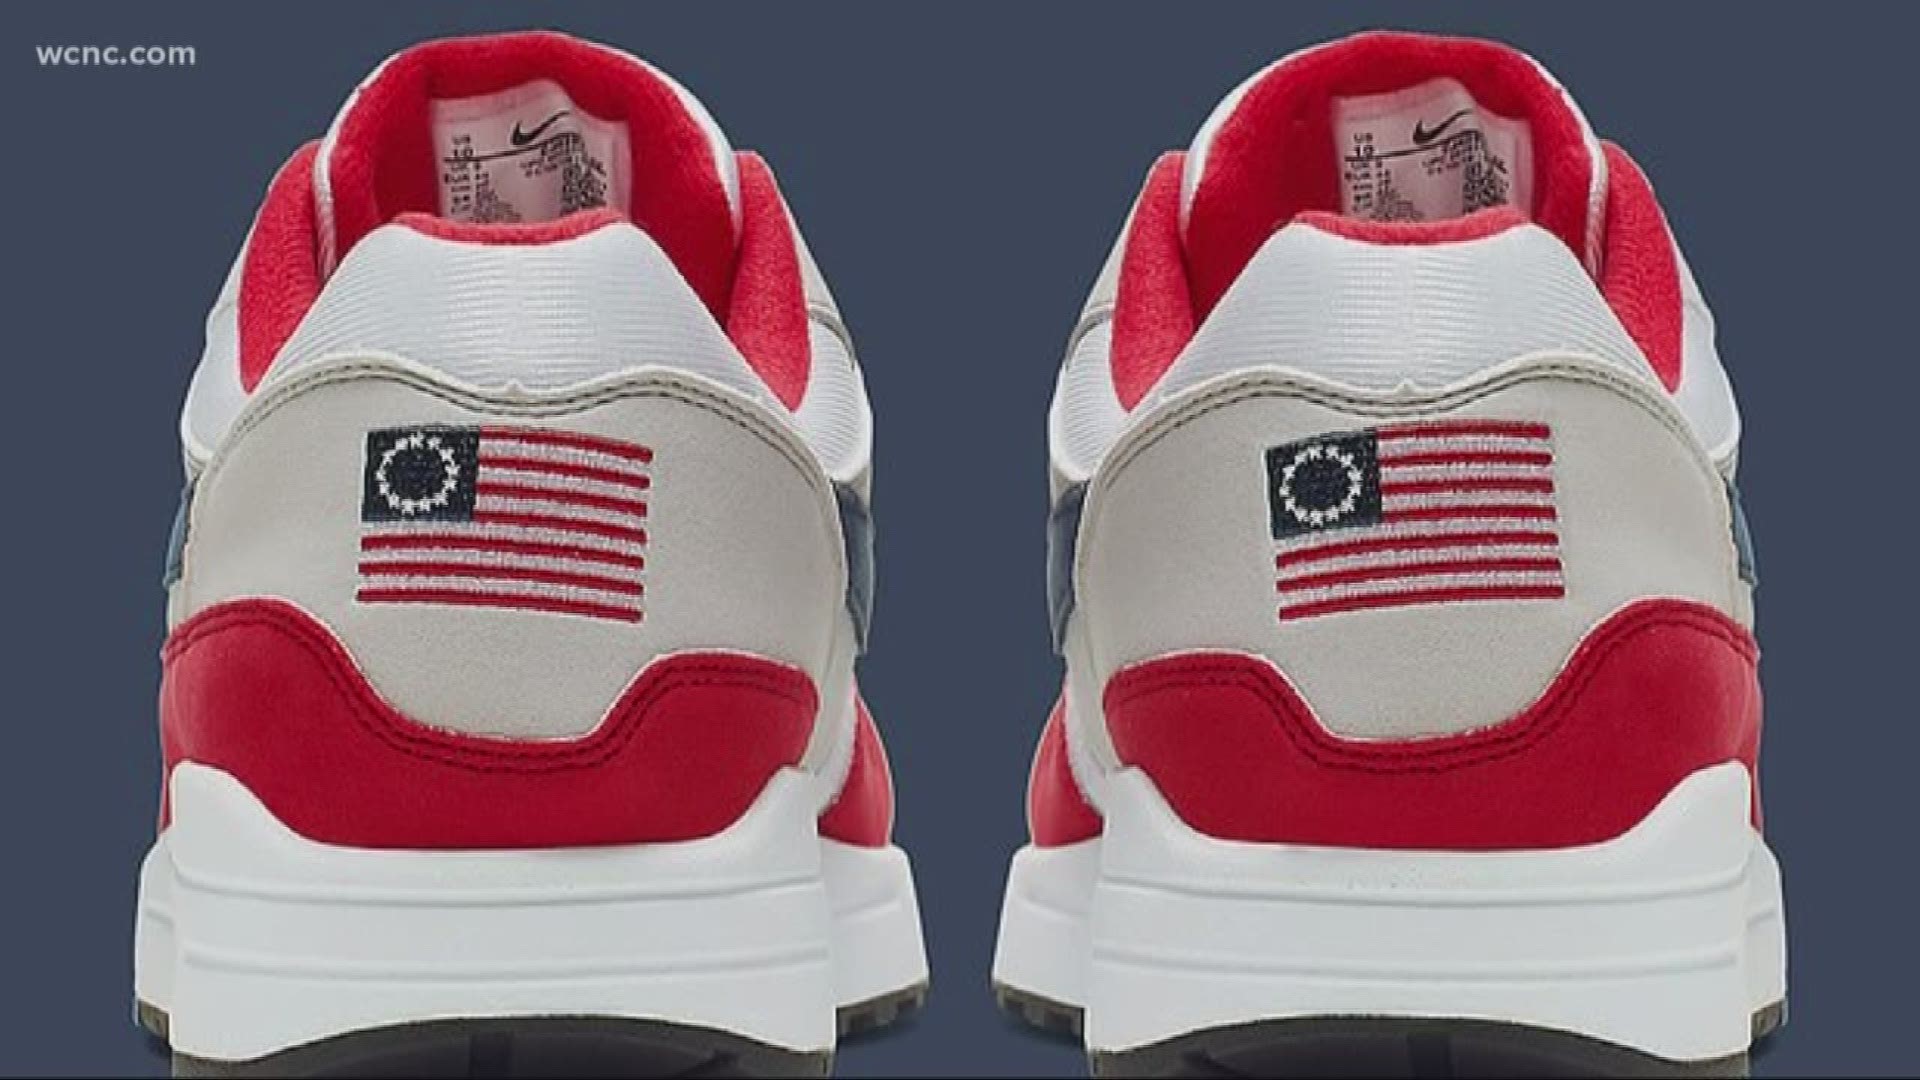 buy betsy ross nike shoes